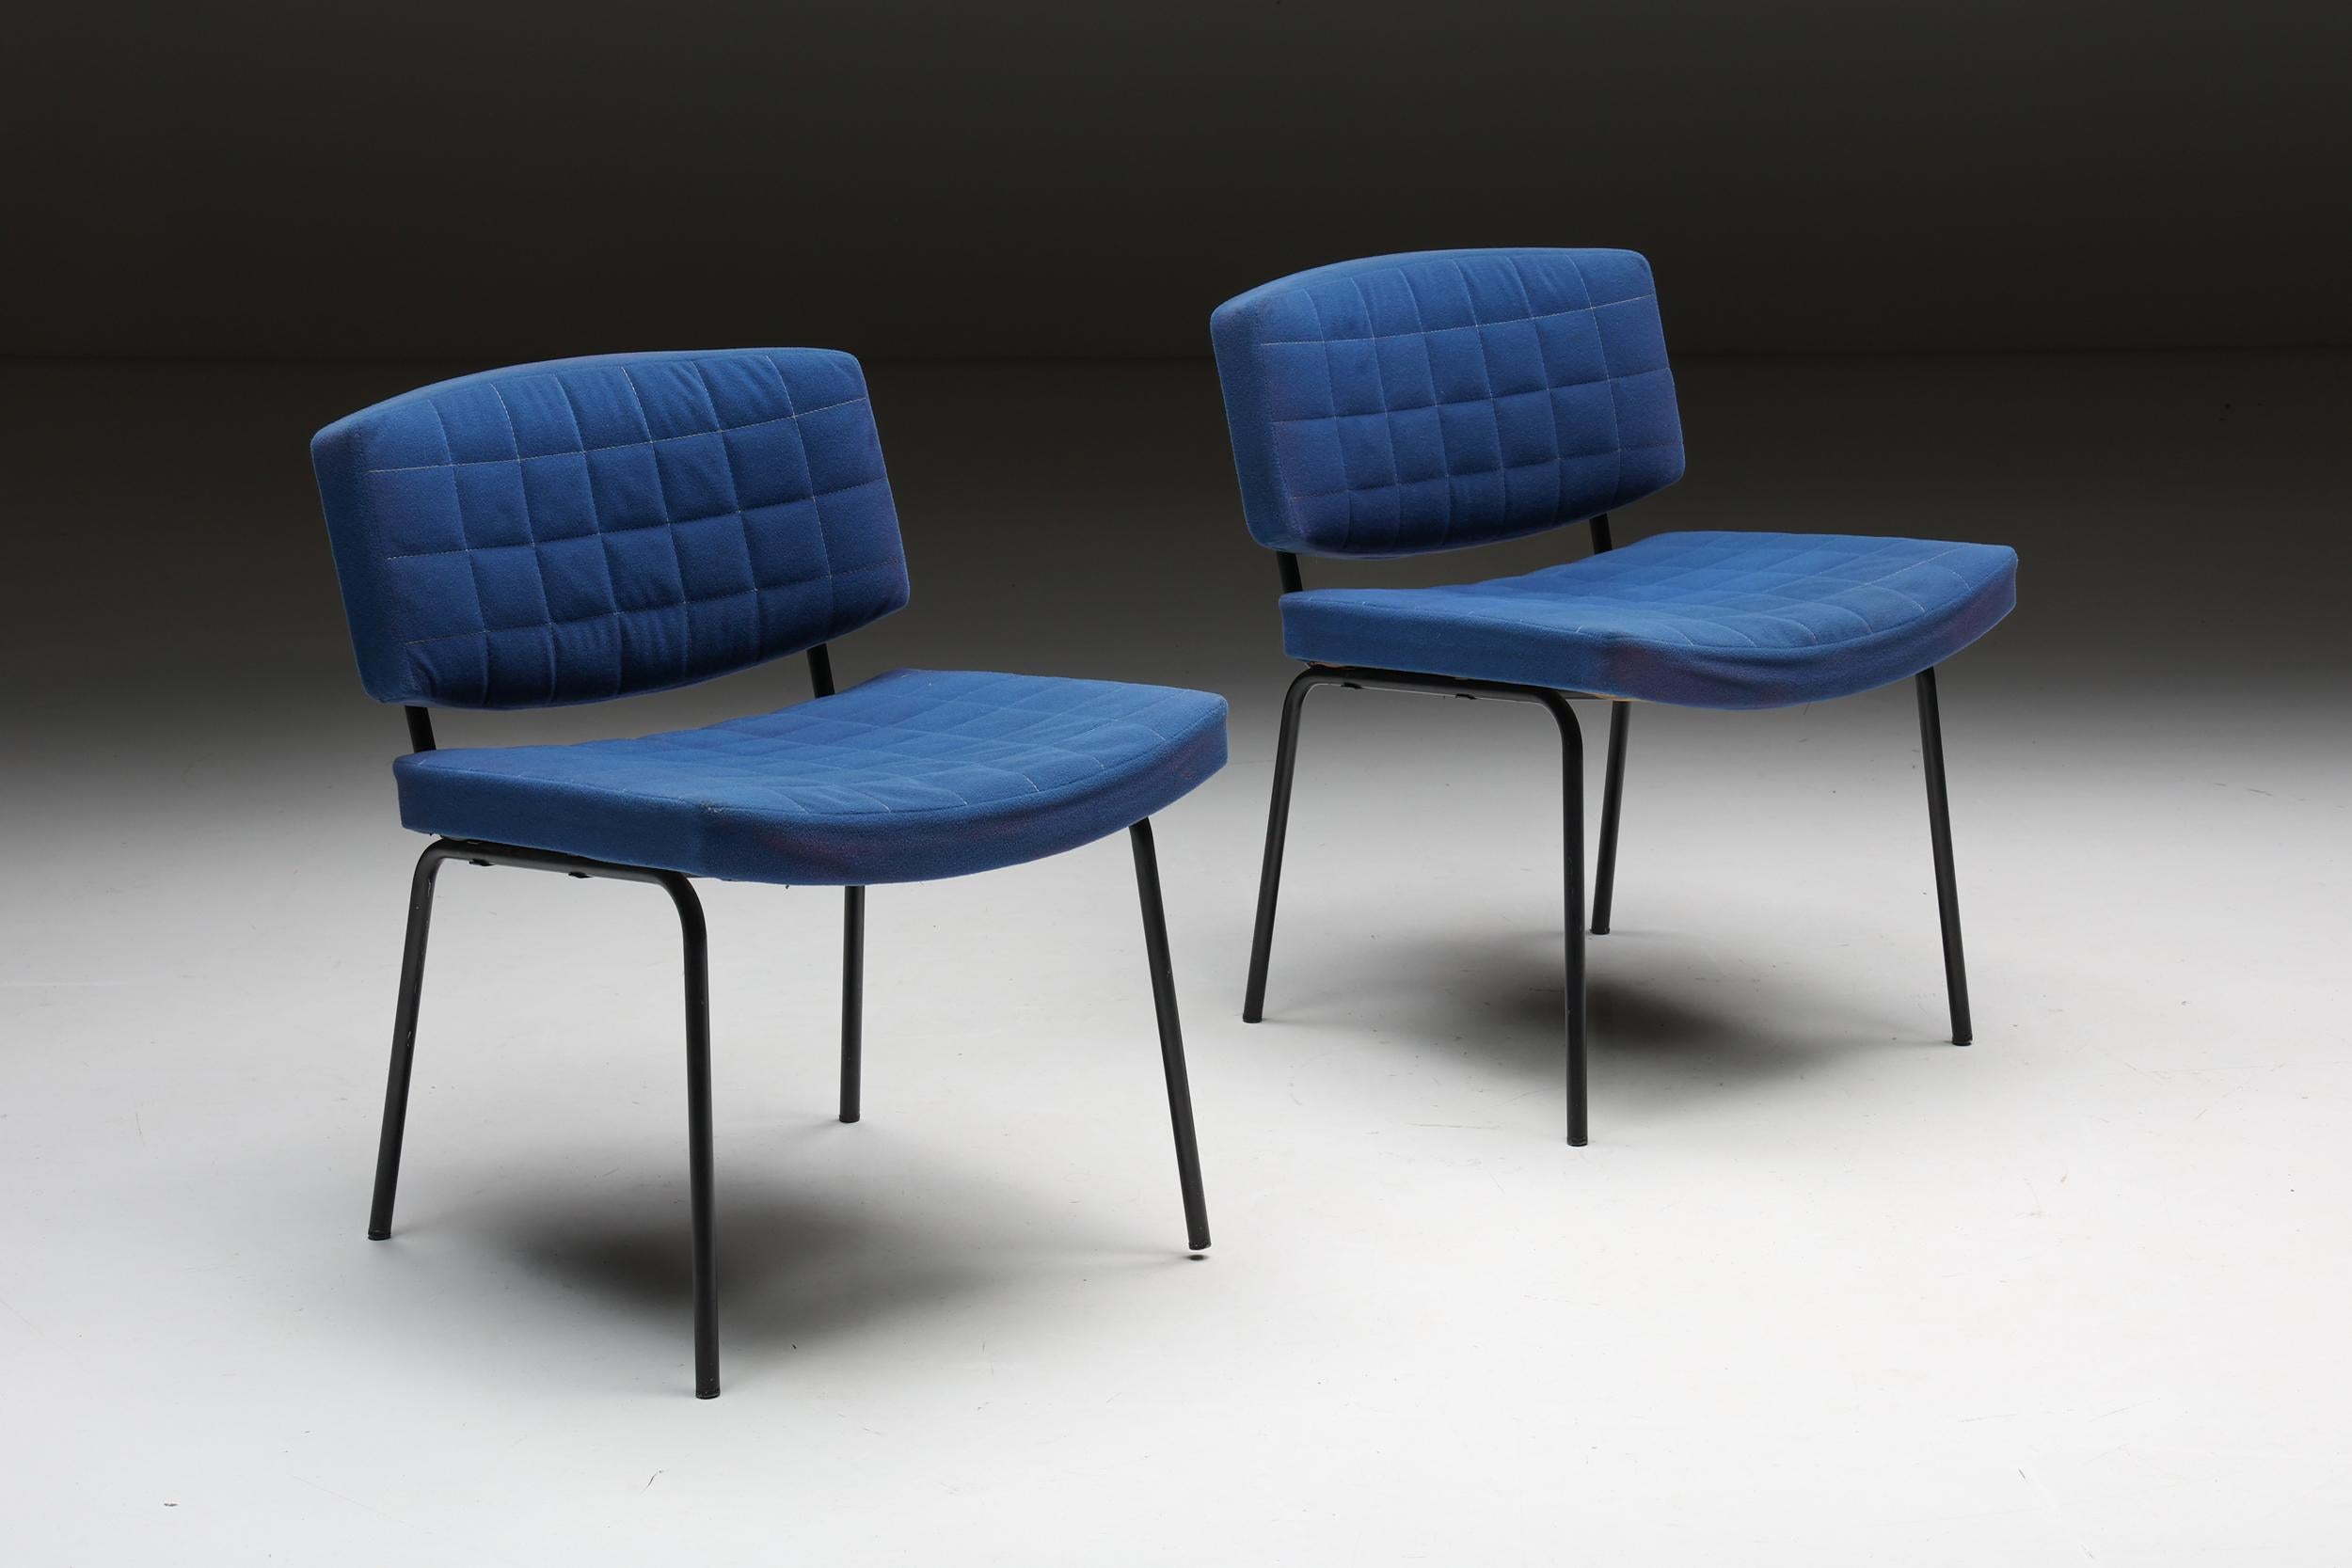 Chairs; blue fabric; upholstery; tubular metal frame; modern; living room; dining chairs; office chair; Mid-Century Modern; Industrial; Minimalist; Postmodern; 

Chairs with blue upholstery and a tubular metal frame. Minimalist side chairs with a